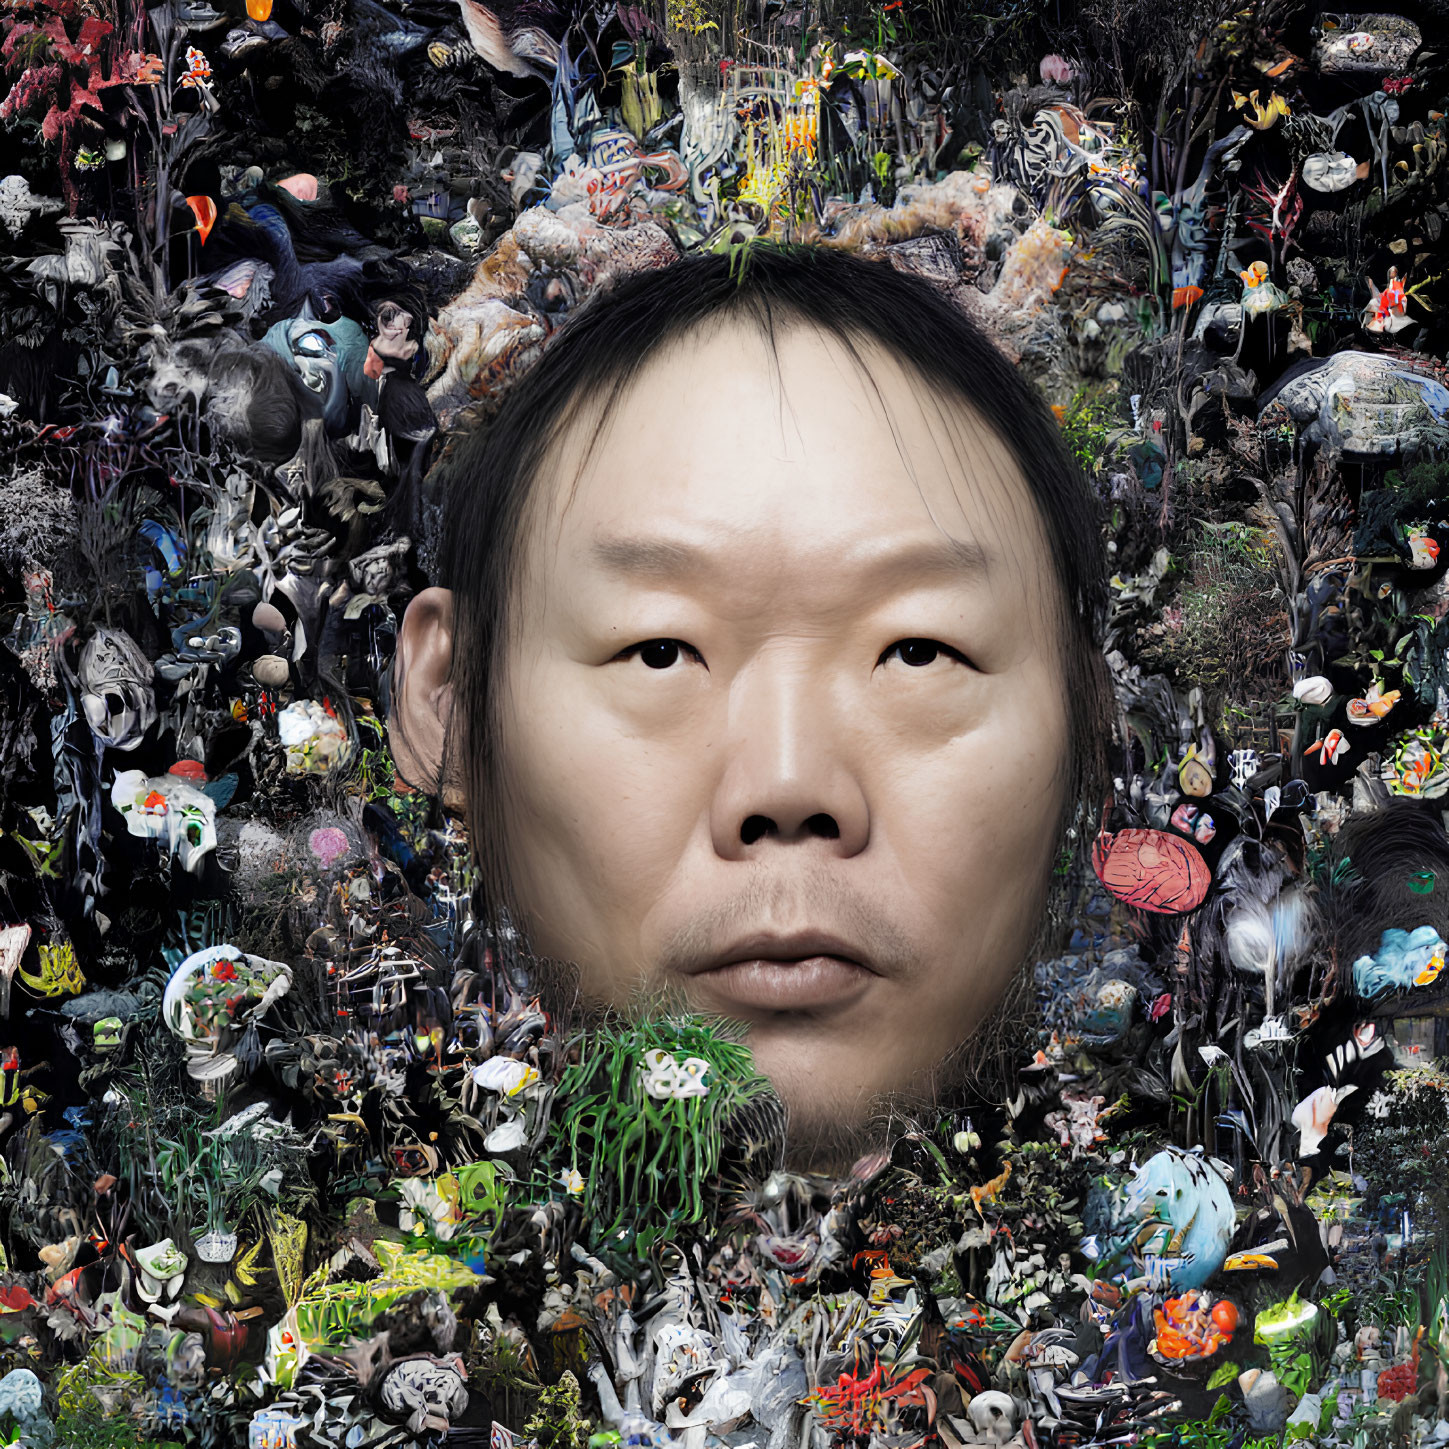 Man's Face Surrounded by Collage of Animals, Cartoons, and Abstract Elements